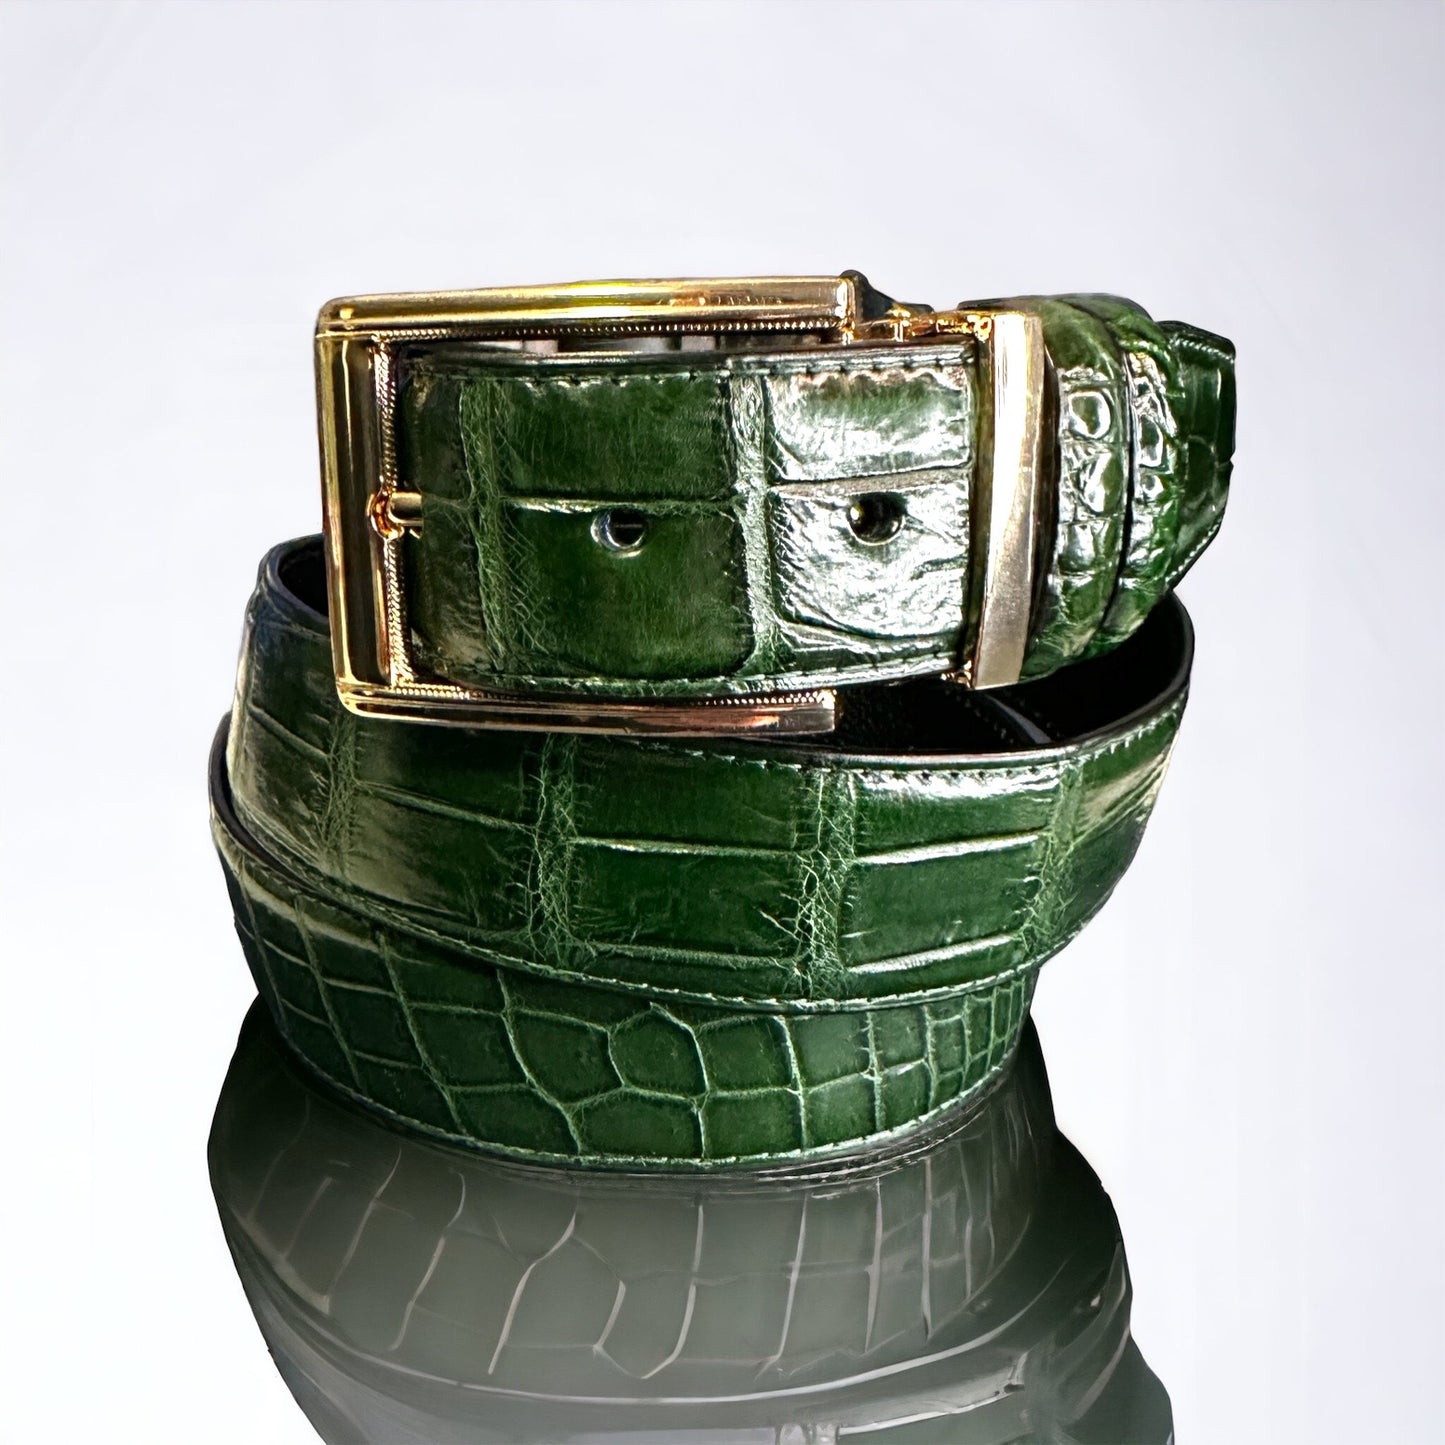 This handmade emerald green natural skin belt in crocodile serves as the standard for men's belts for suits. What is so great about this type of skin is that it fits with any outfit even jeans. With the supplied gold square and nickel square buckles, you get to choose what look you need for any type of event. Adjustable. Interchangeable buckles.